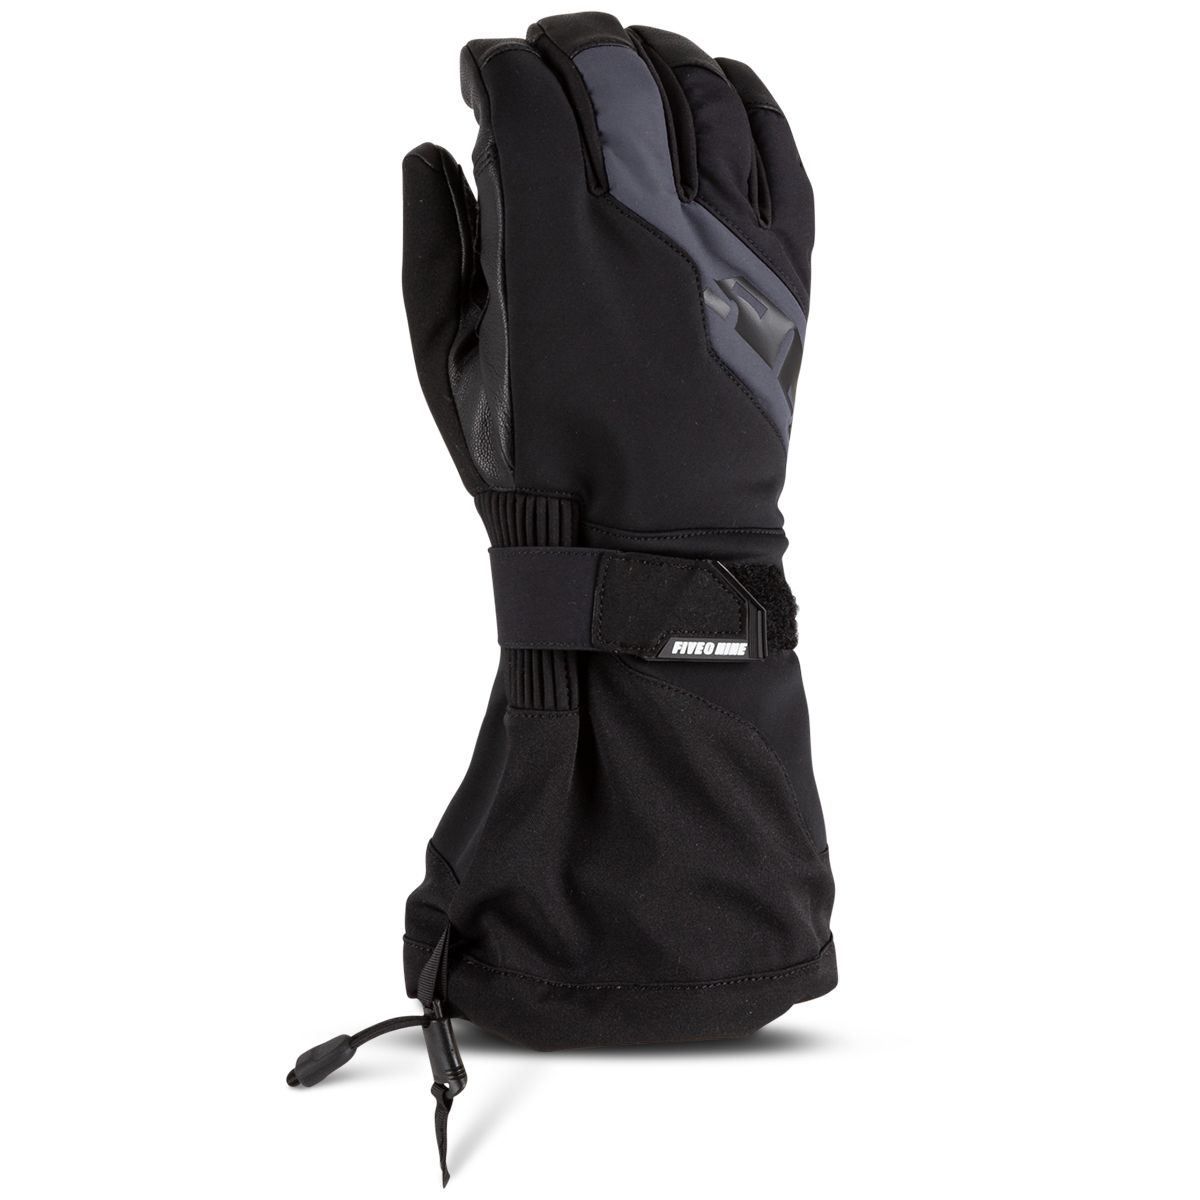  adult backcountry black